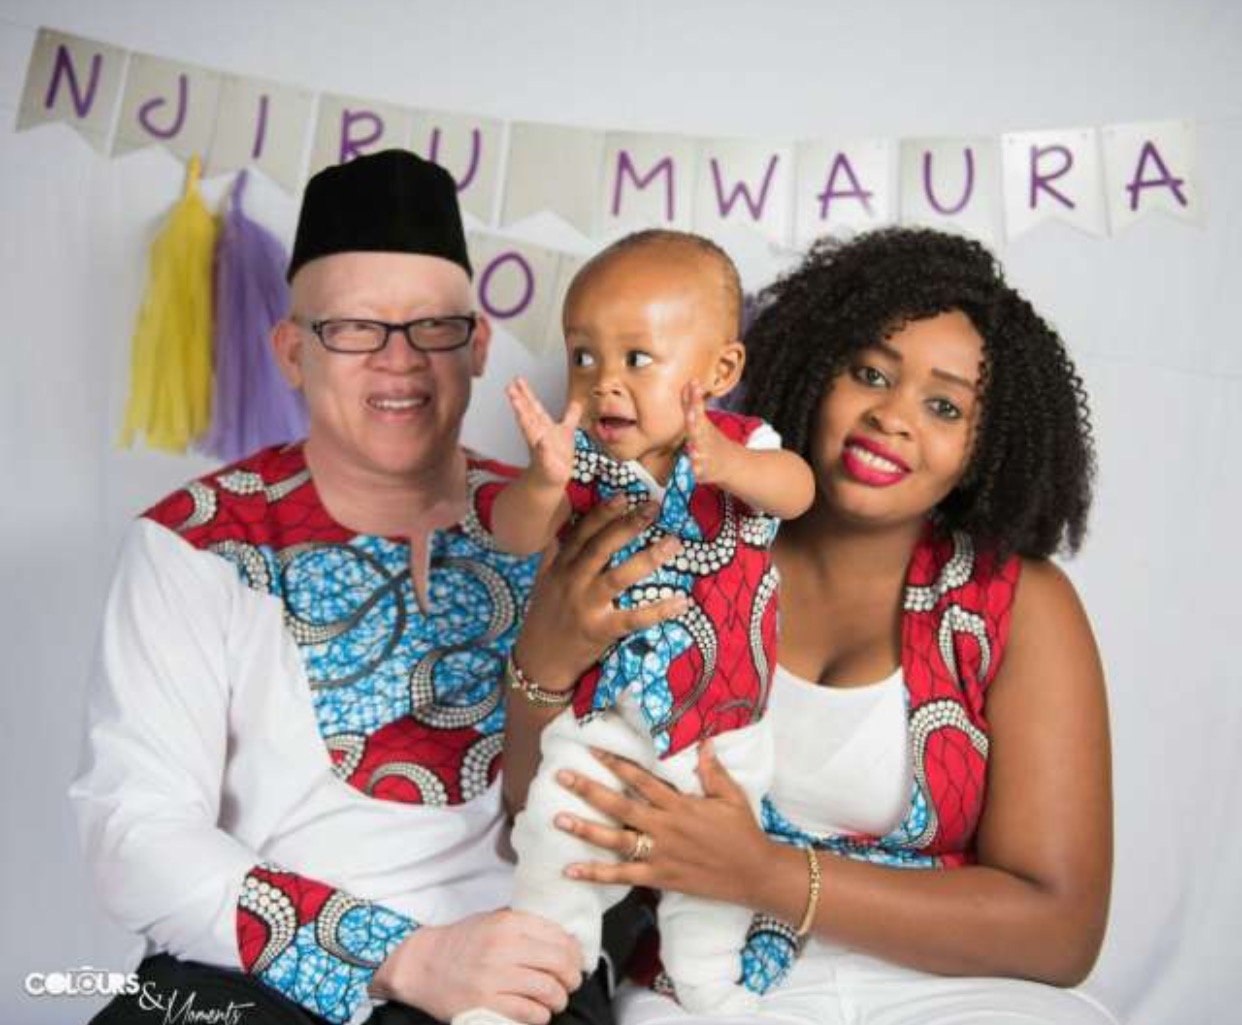 Isaac Mwaura and wife celebrate their son’s first birthday